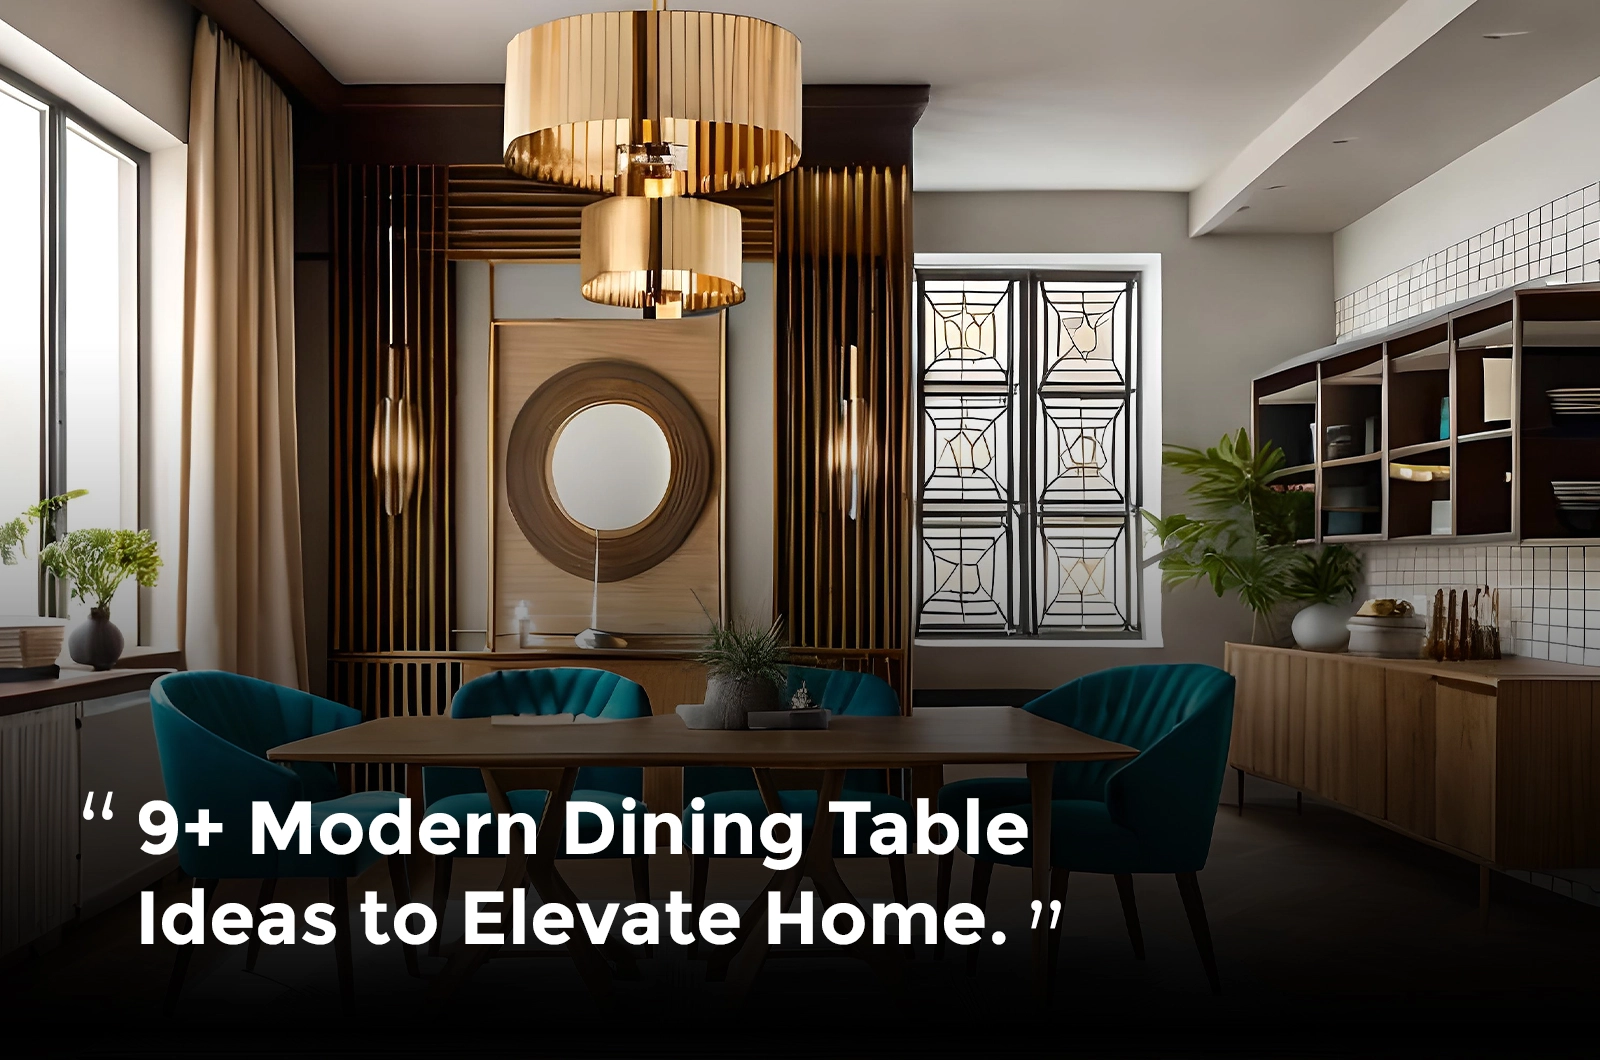 Modern Dining Table Design: 9+Best Ideas to Elevate Home